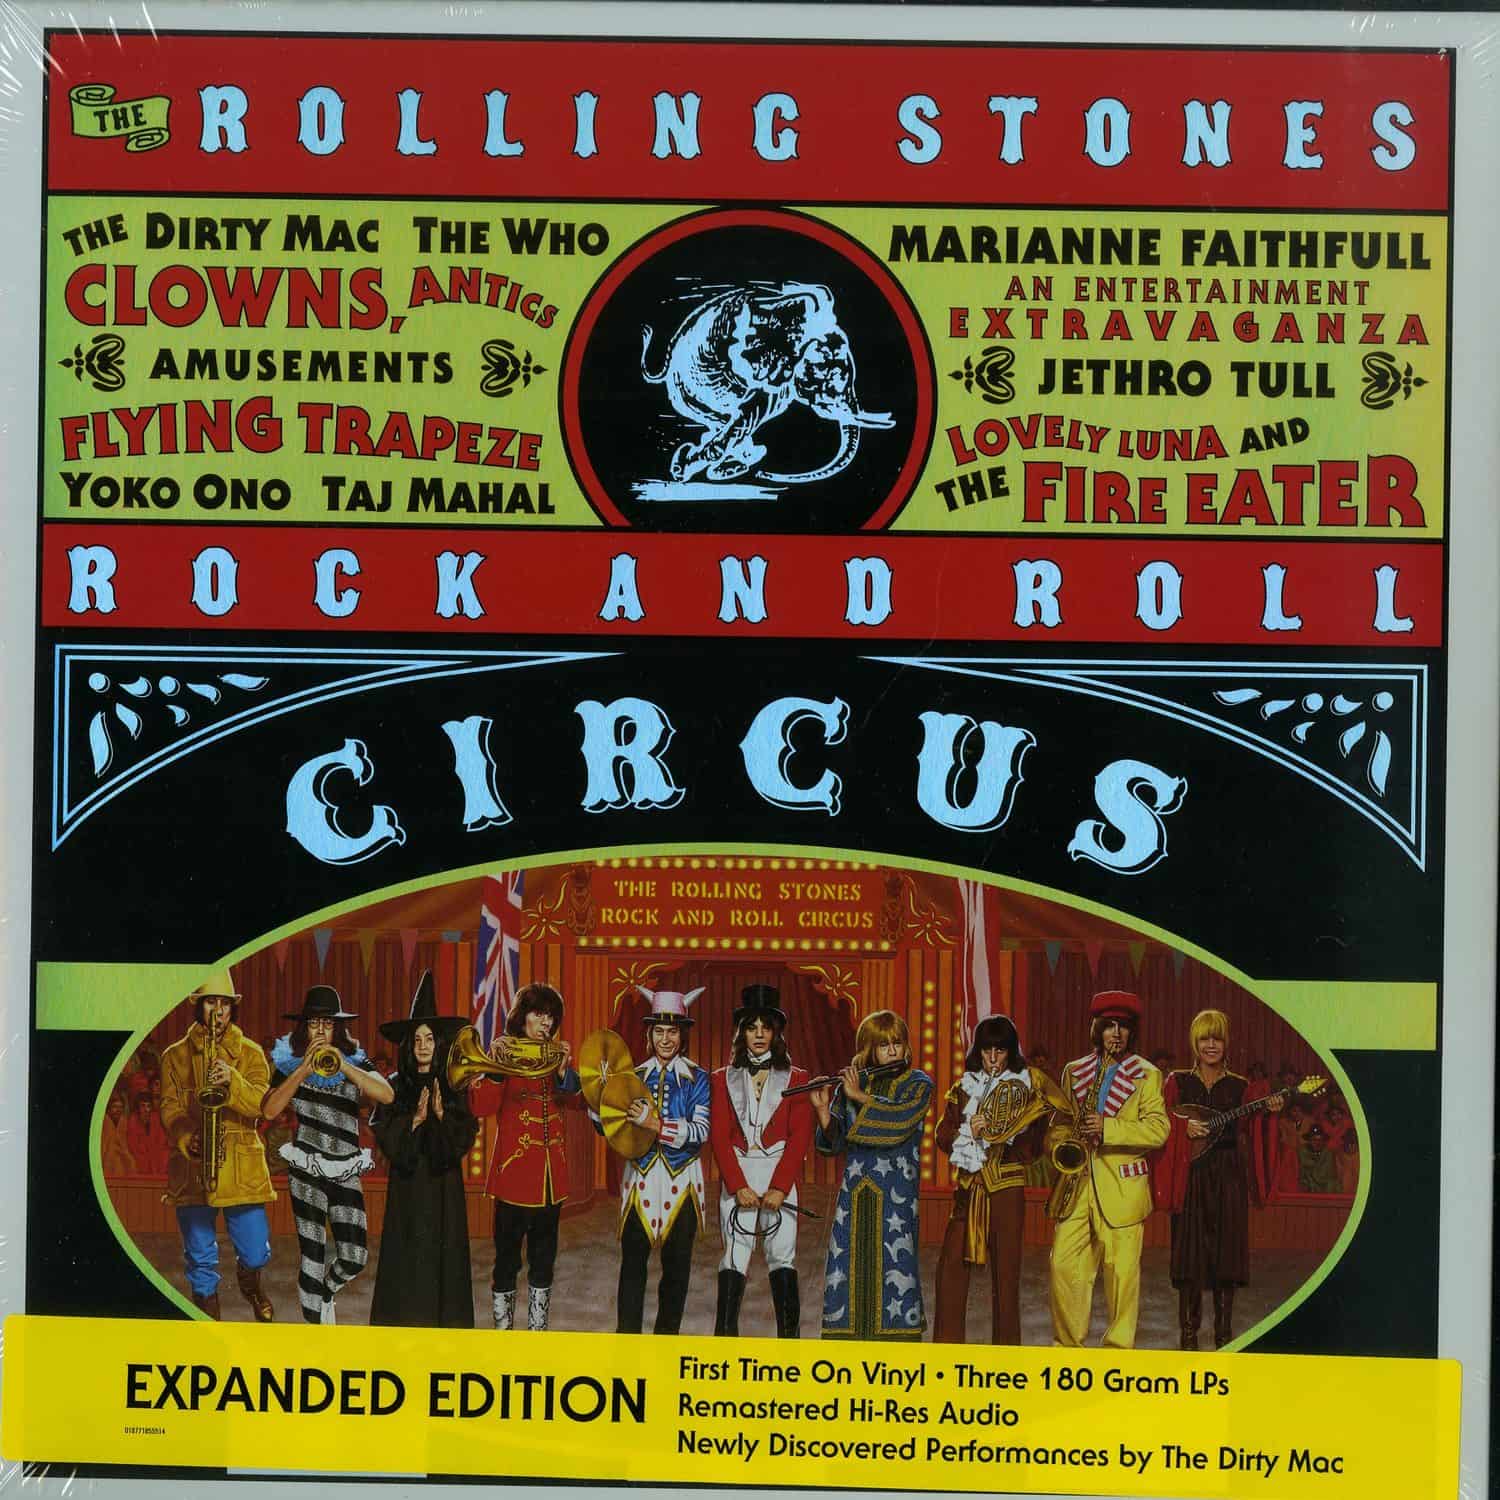 The Rolling Stones - THE ROLLING STONES ROCK AND ROLL CIRCUS 